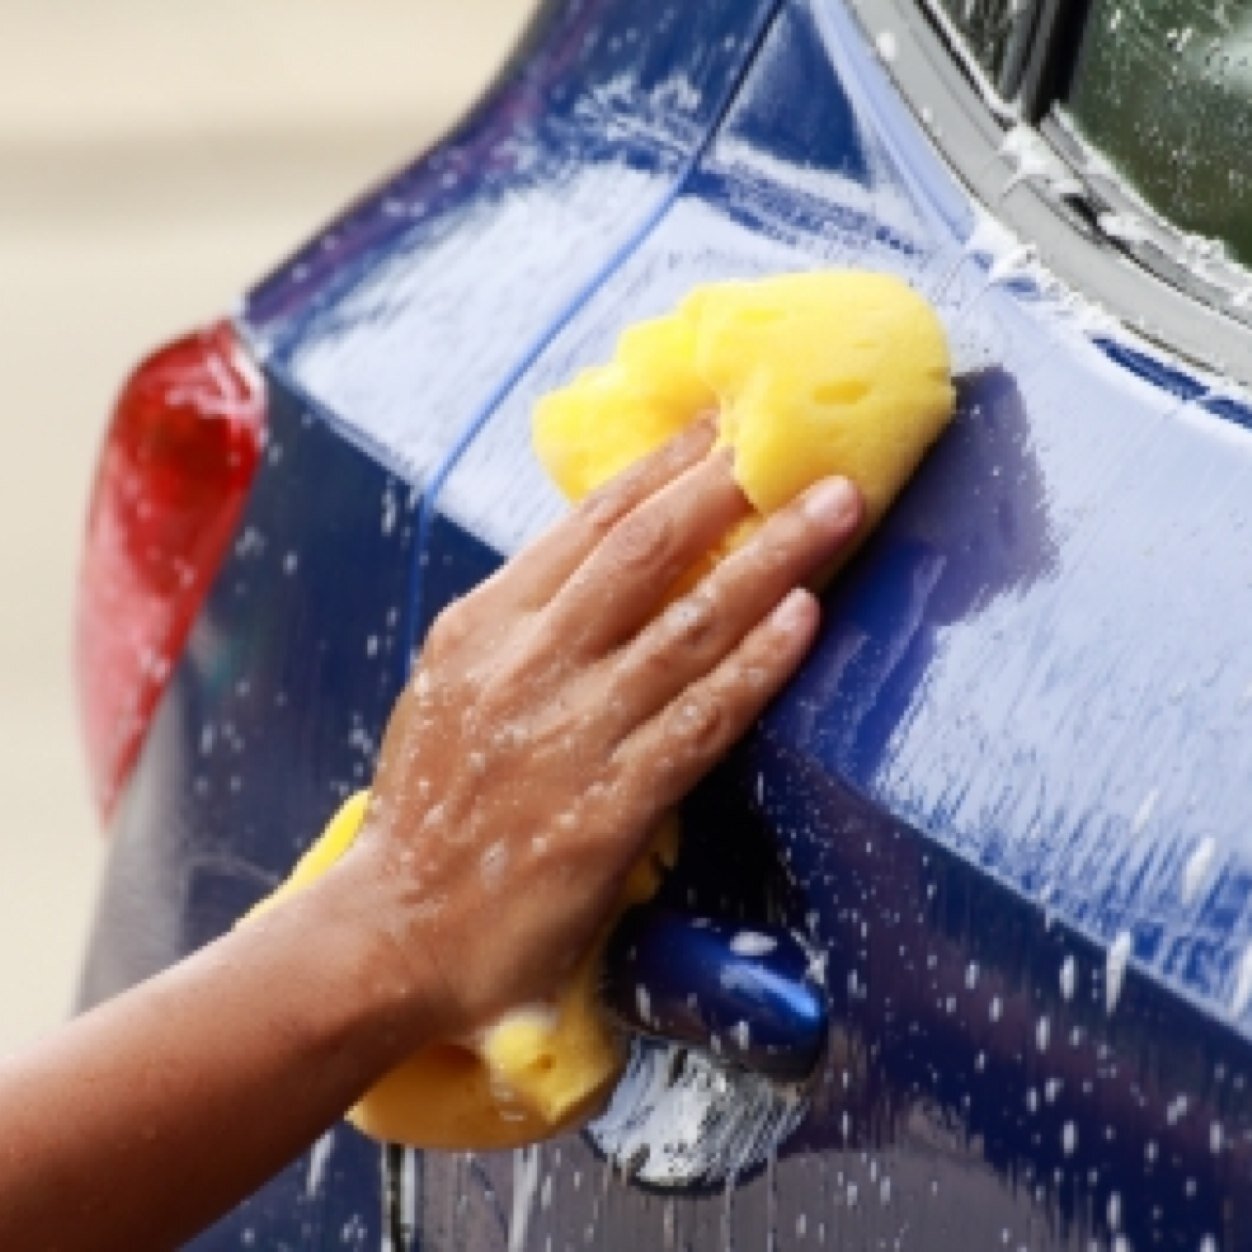 UK #Charity #Carwash promotion account (formerly @Charity_Carwash) Let us know about charity carwash events taking place, so we can RT and help support